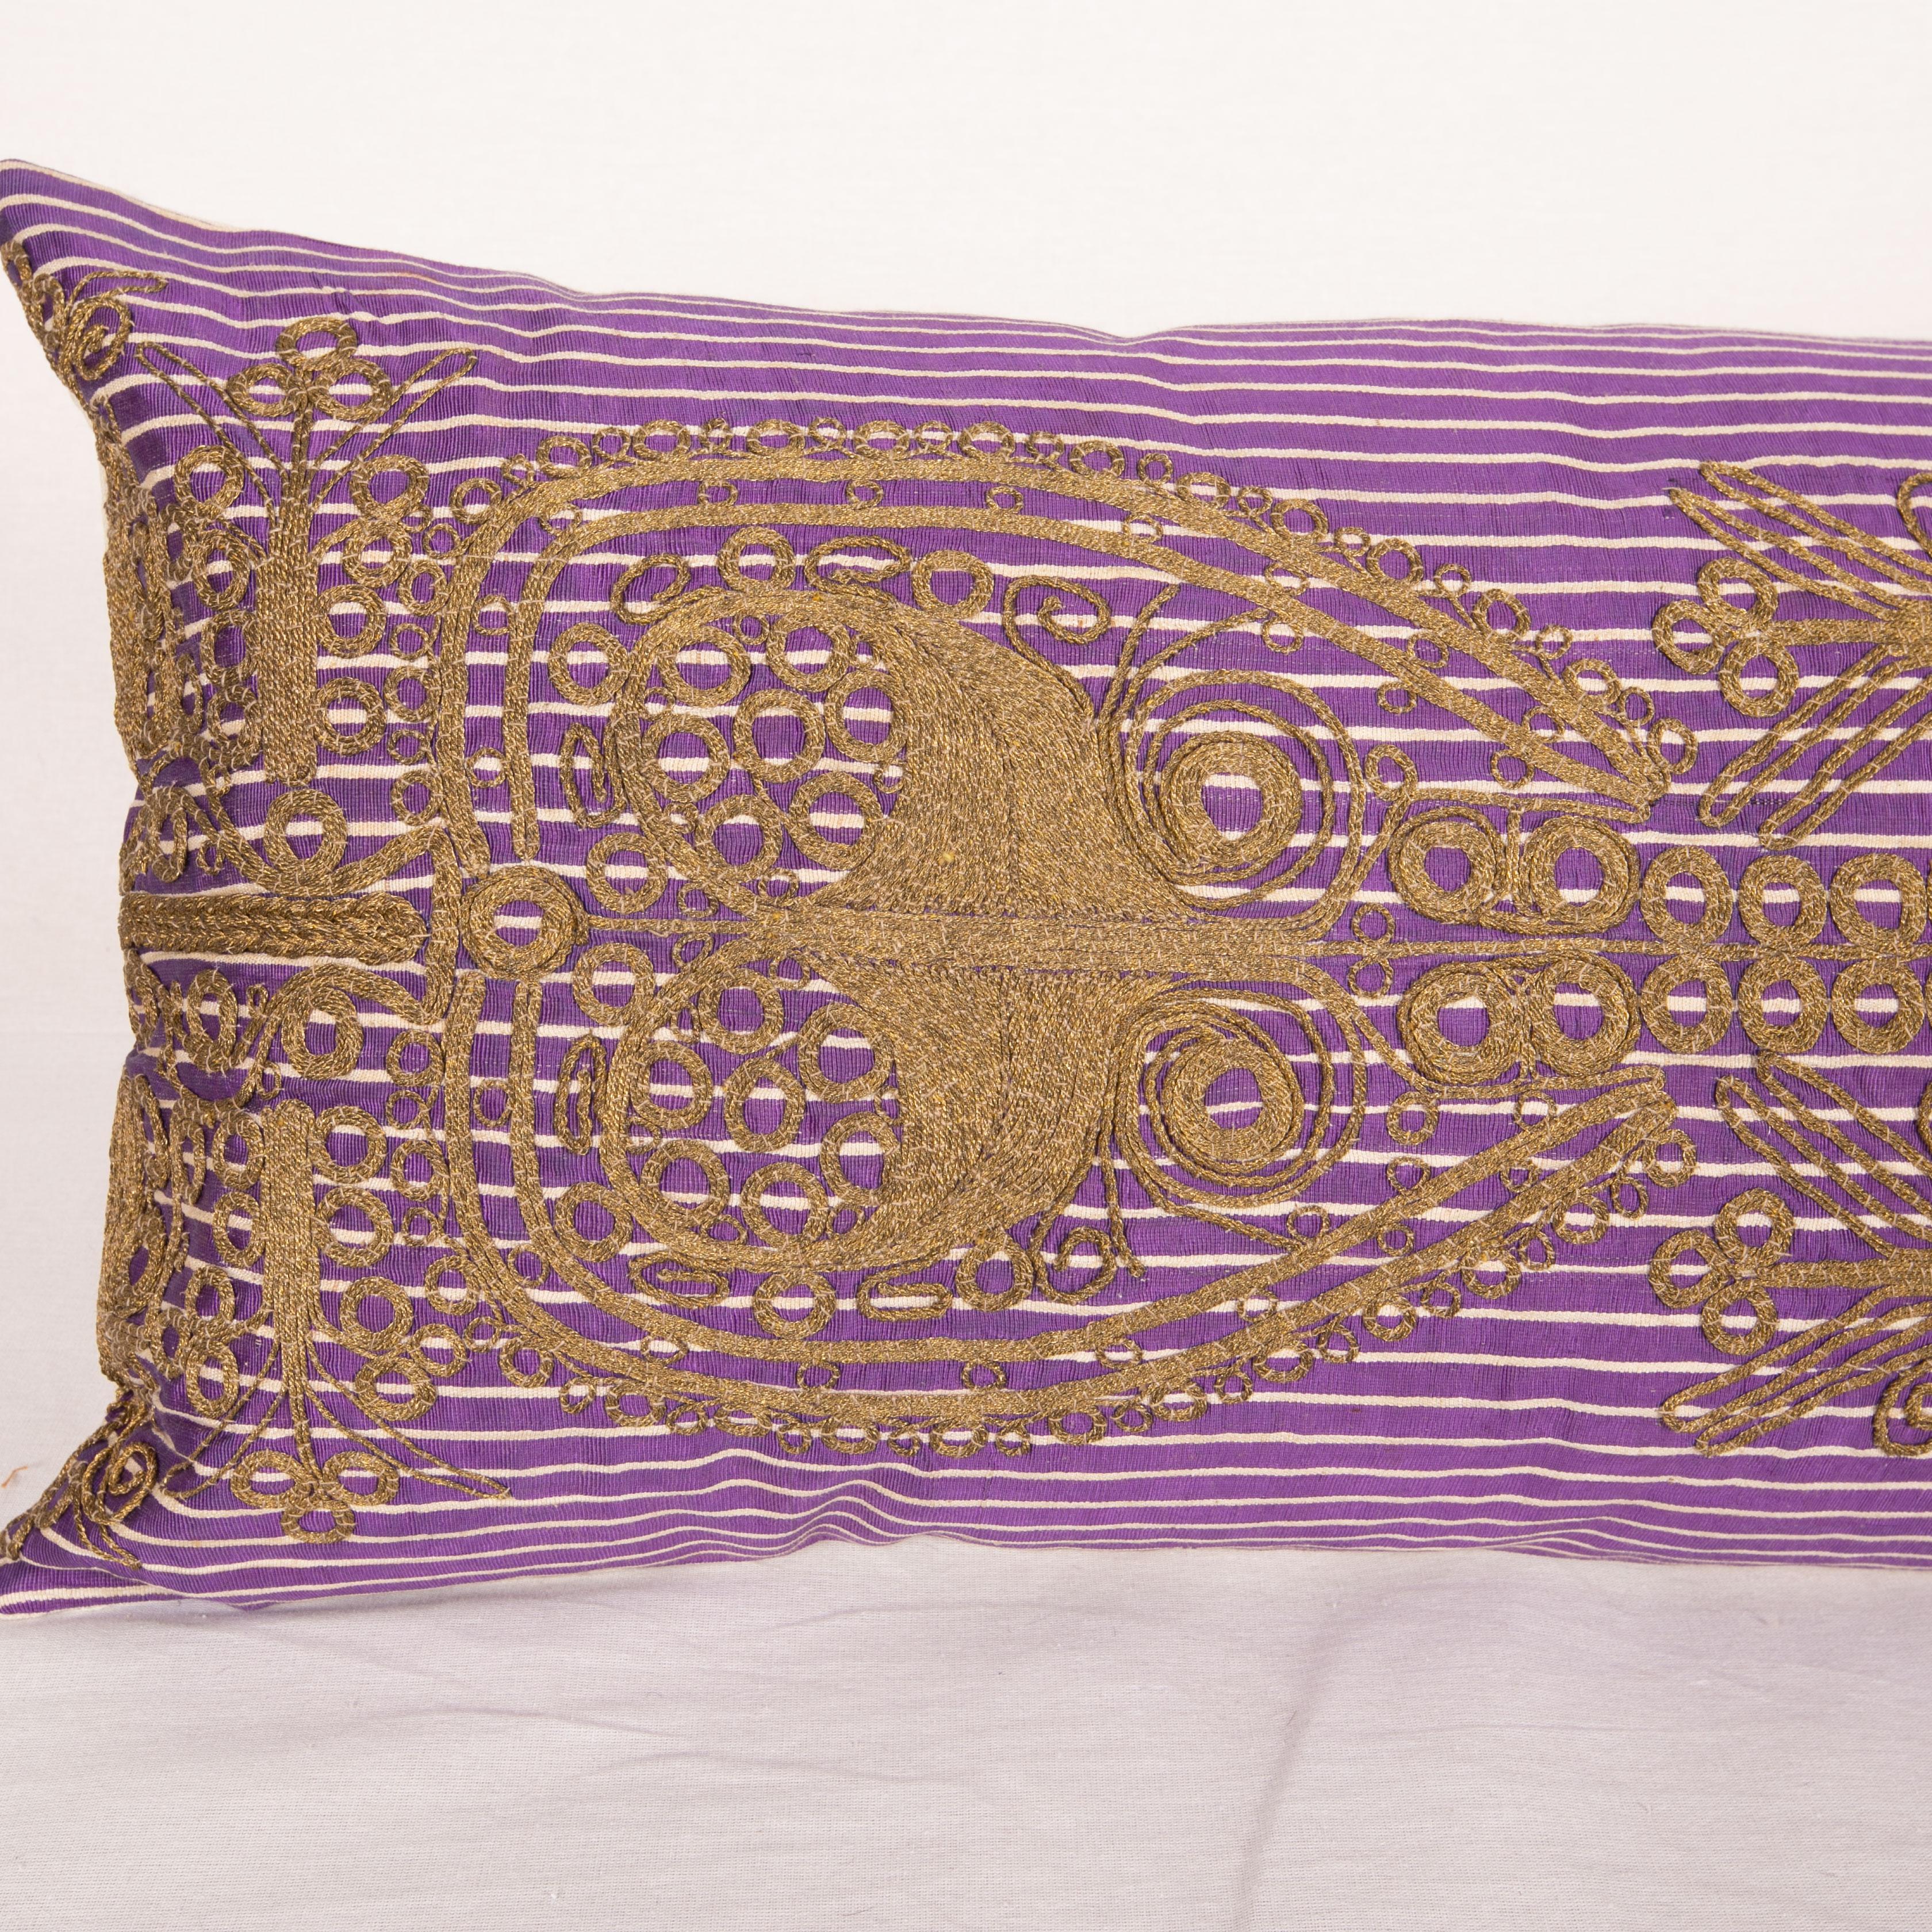 Islamic Antique Ottoman Turkish Pillow Case, Early 20th C. For Sale